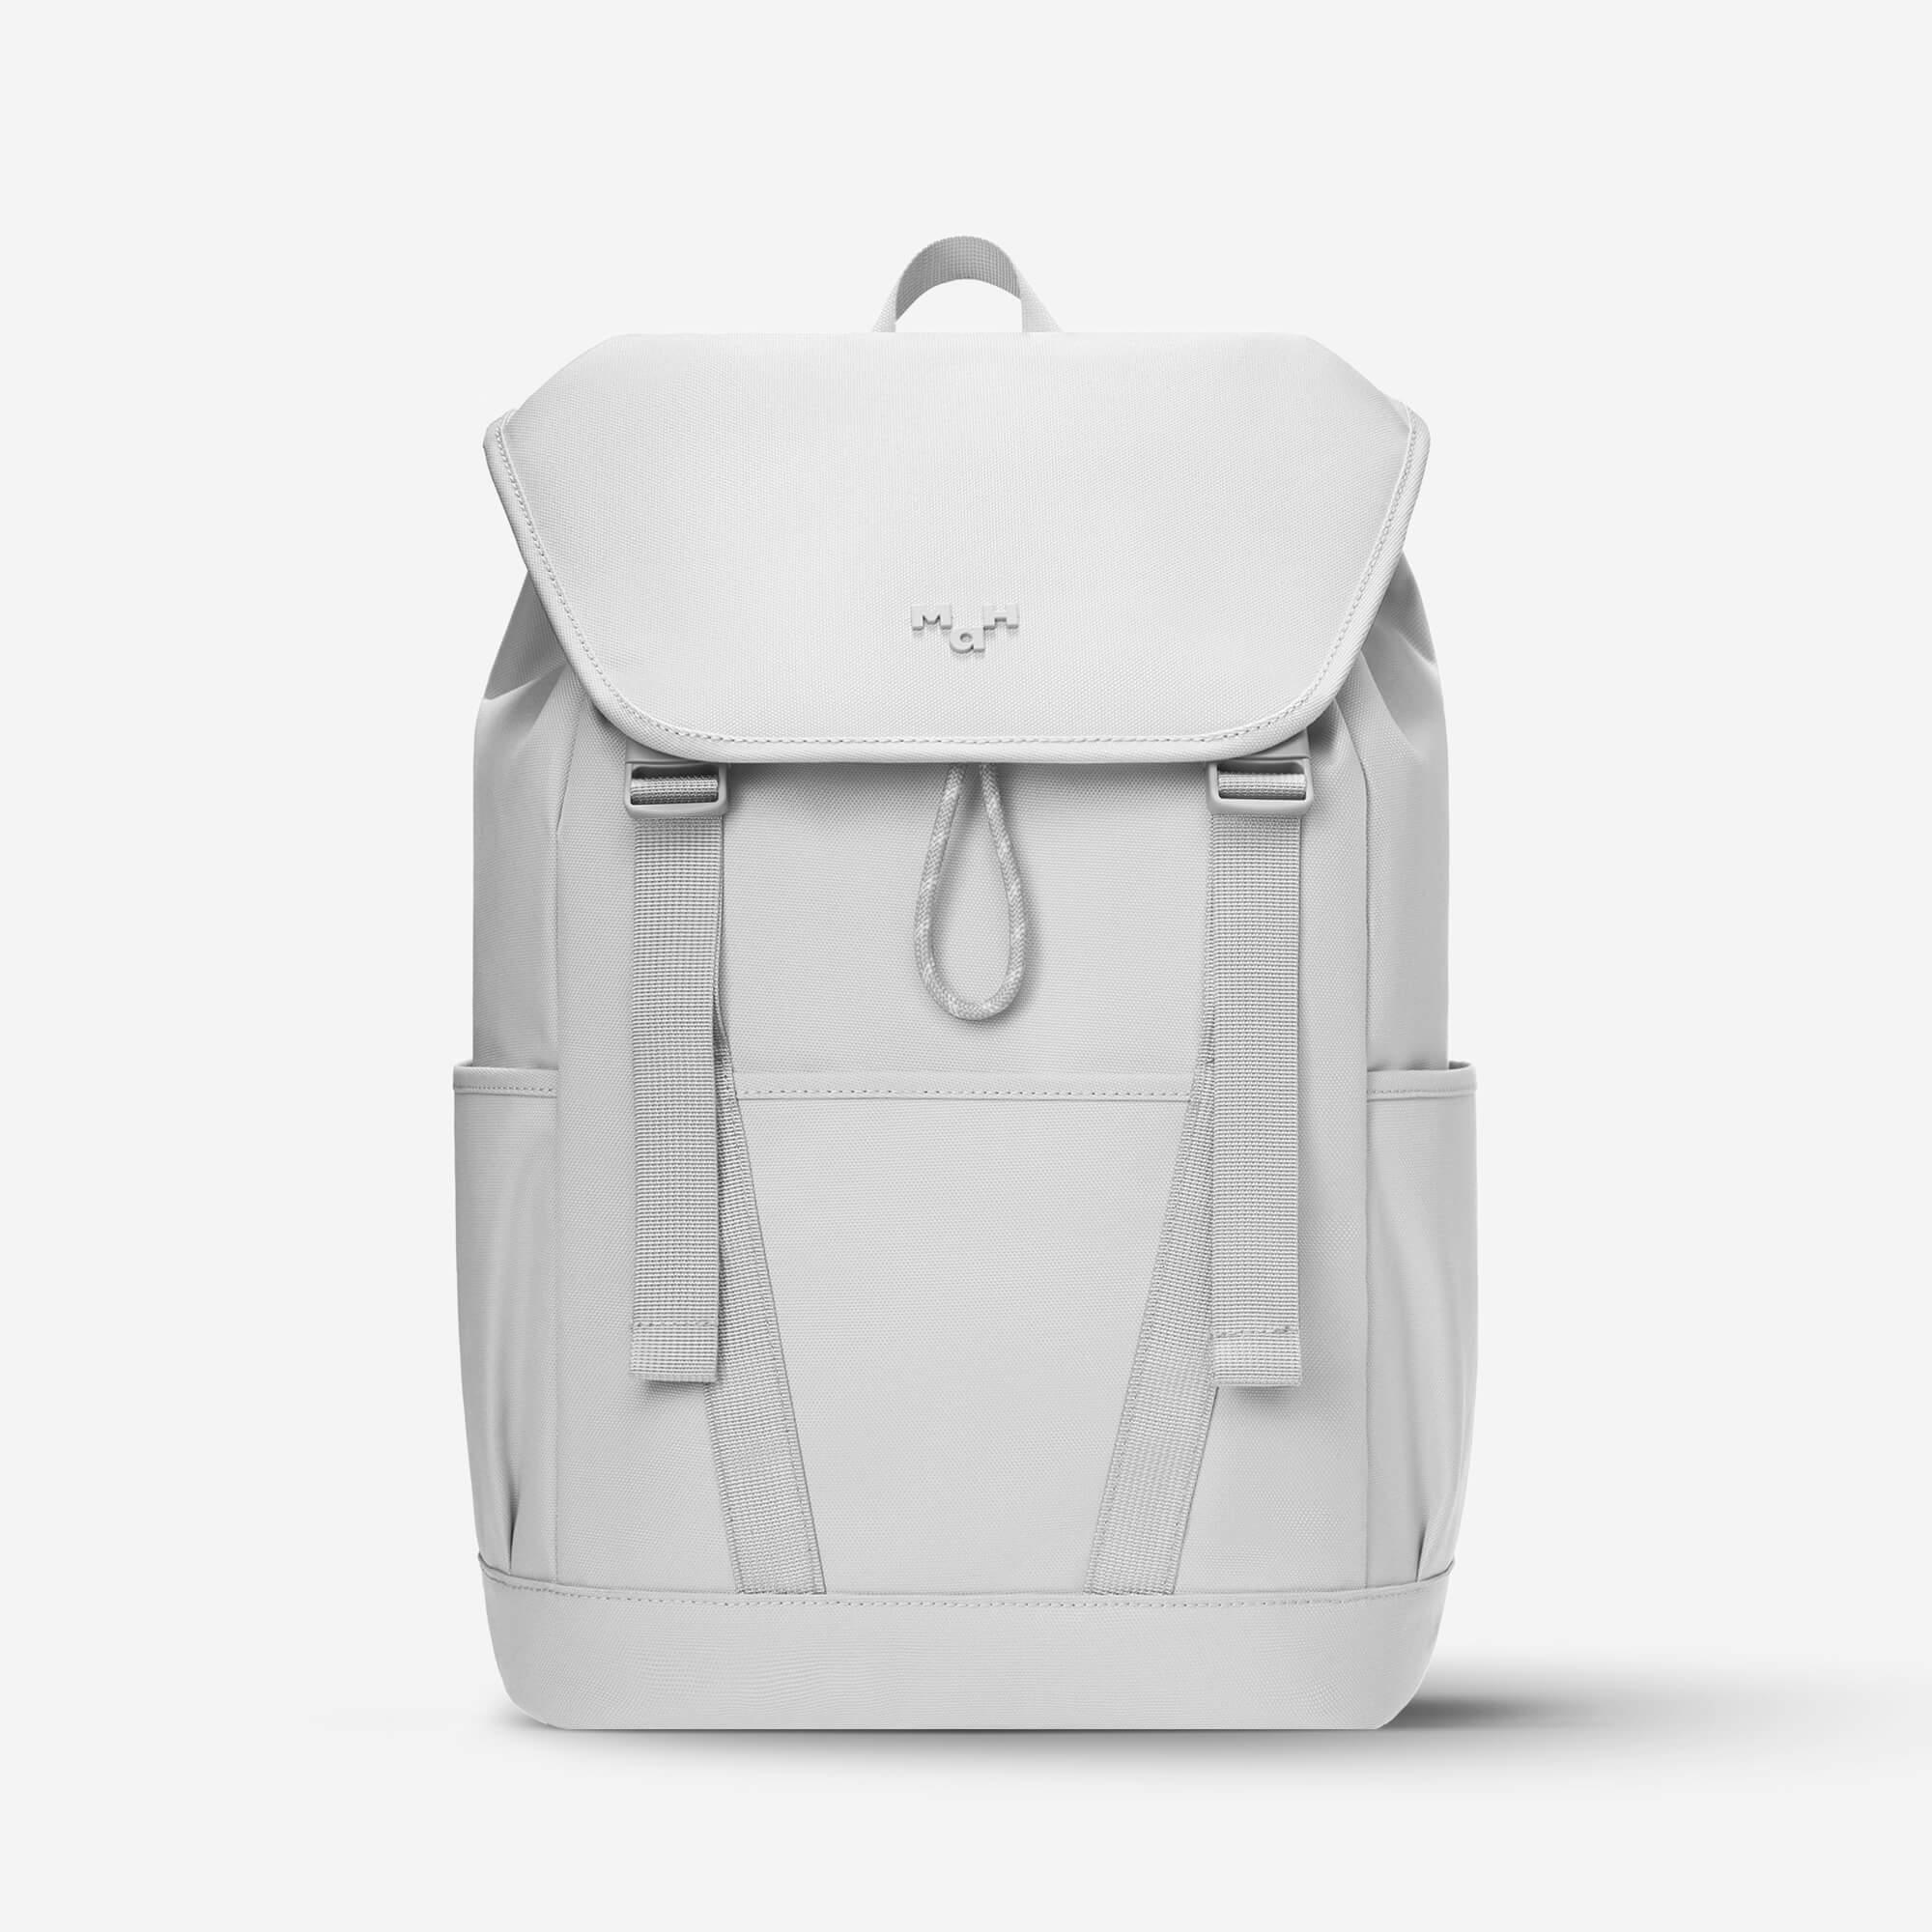 Traveling Backpack With Drawstring - Grey